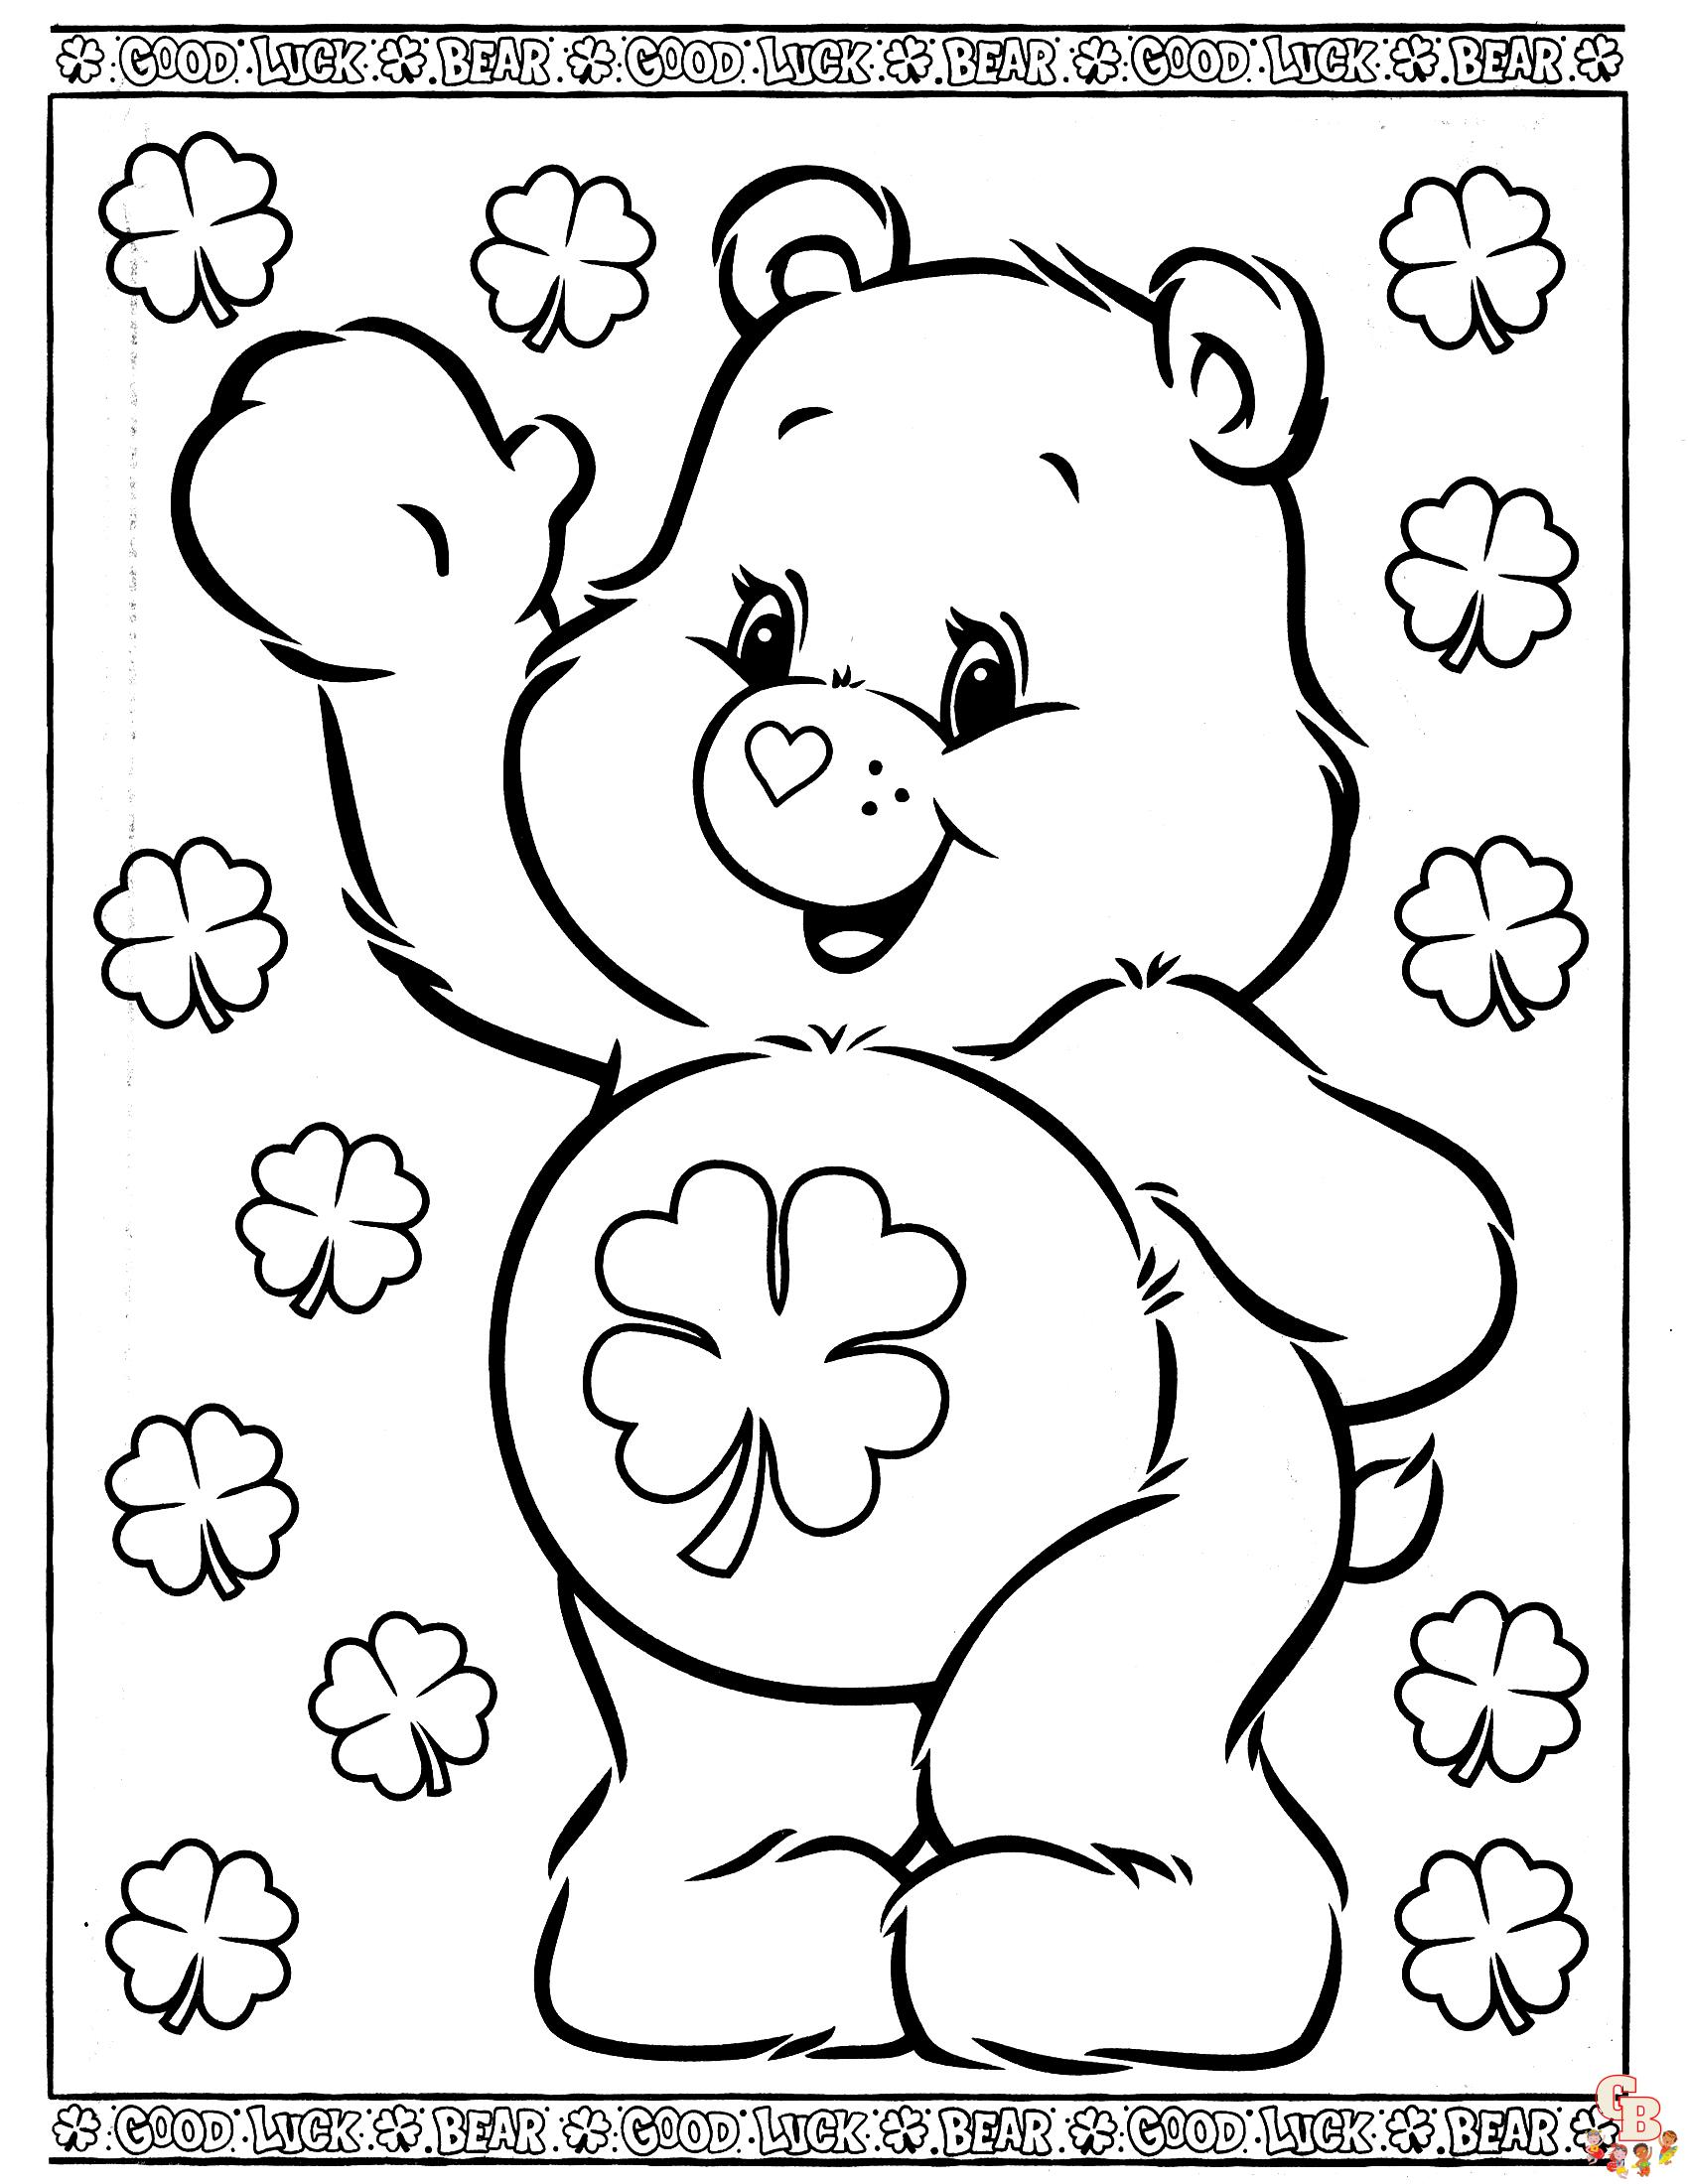 Coloriage Bisounours